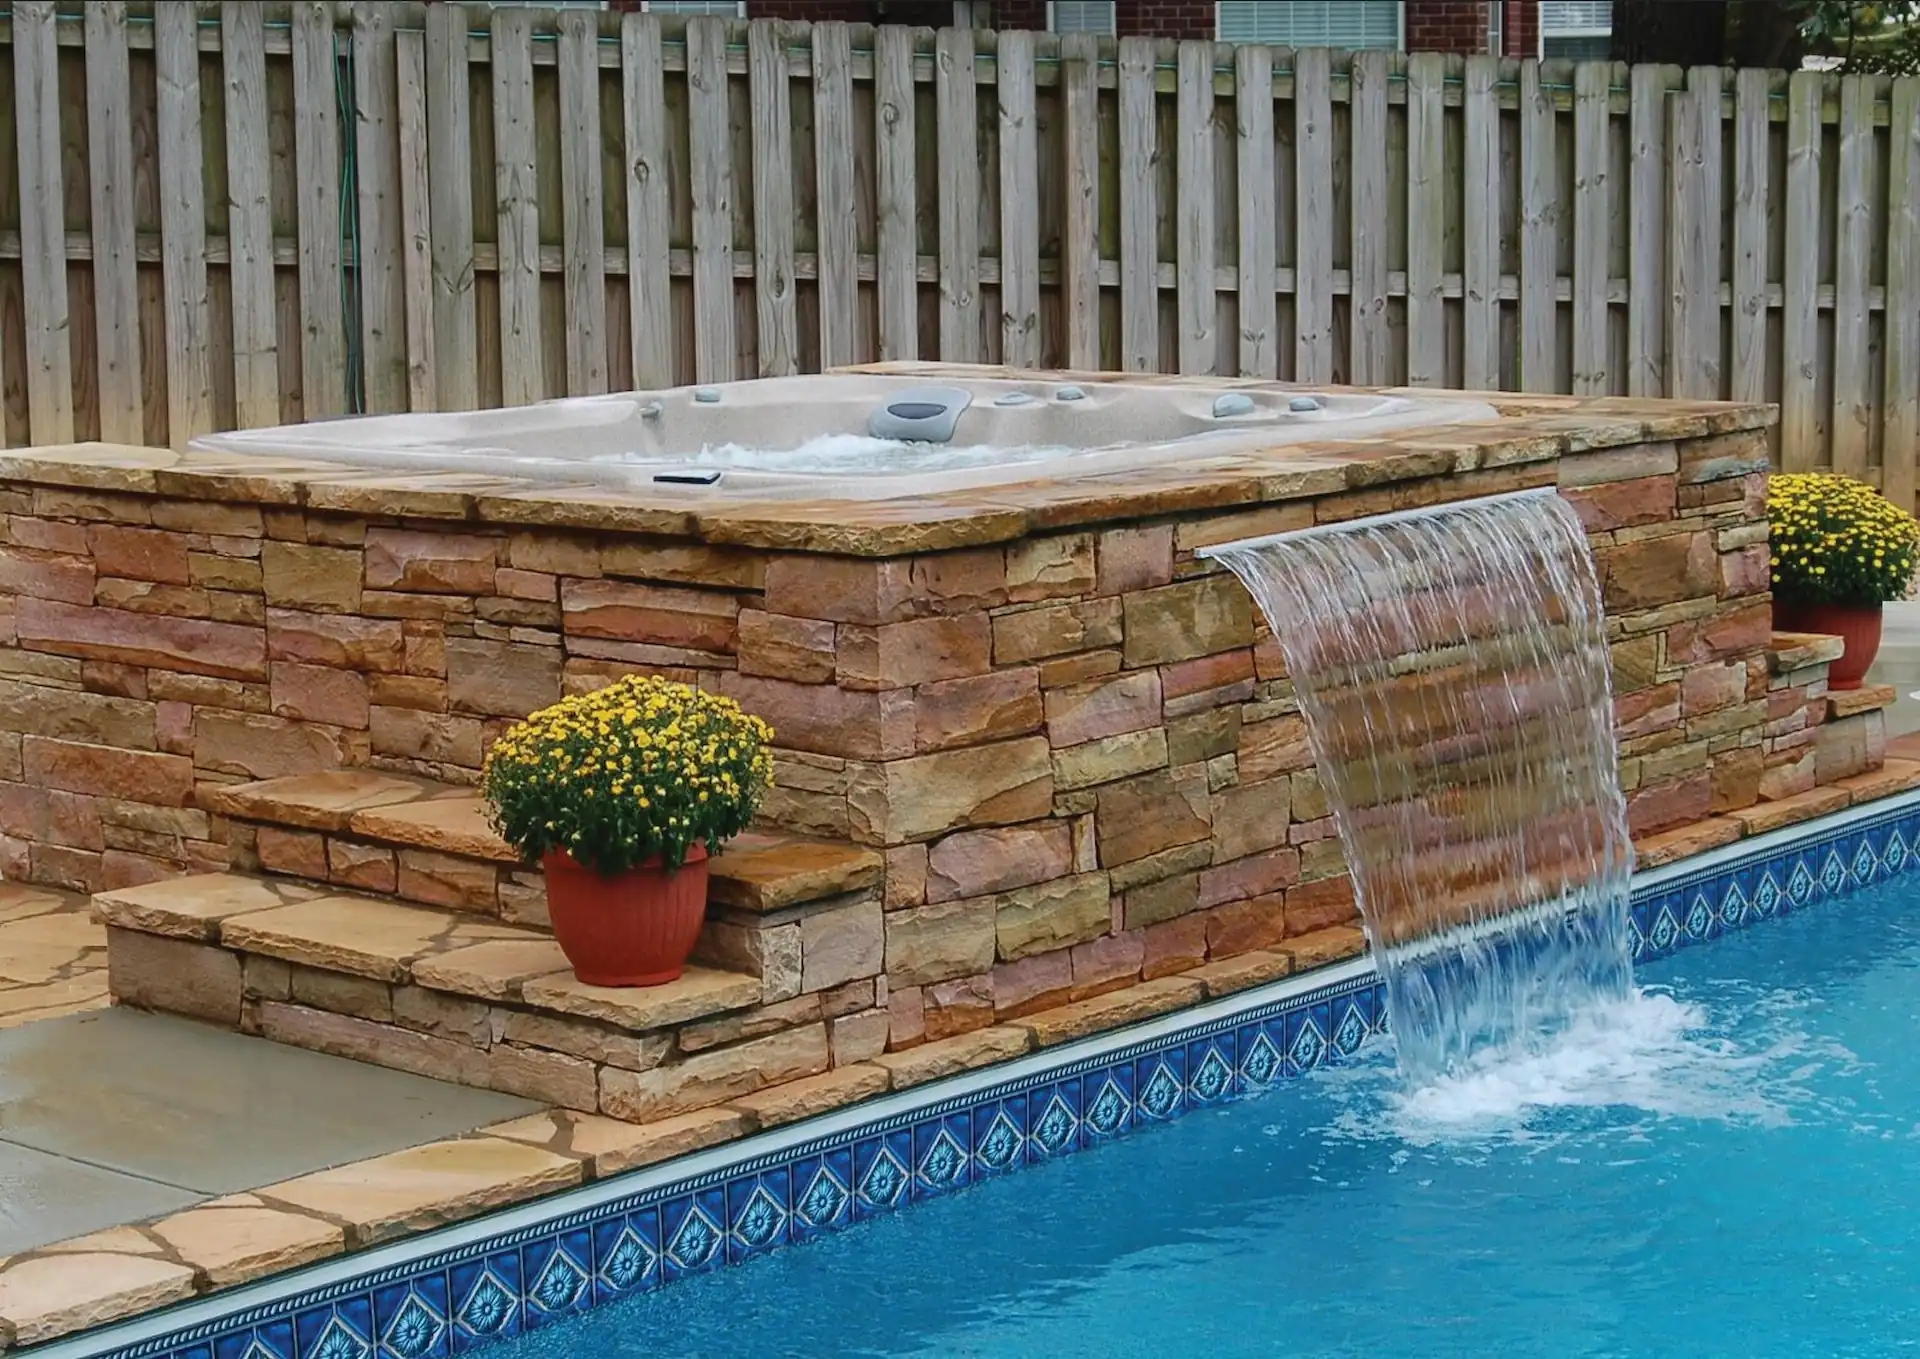 A pool and hot tub combo complete with a concrete surround and a water cascade.